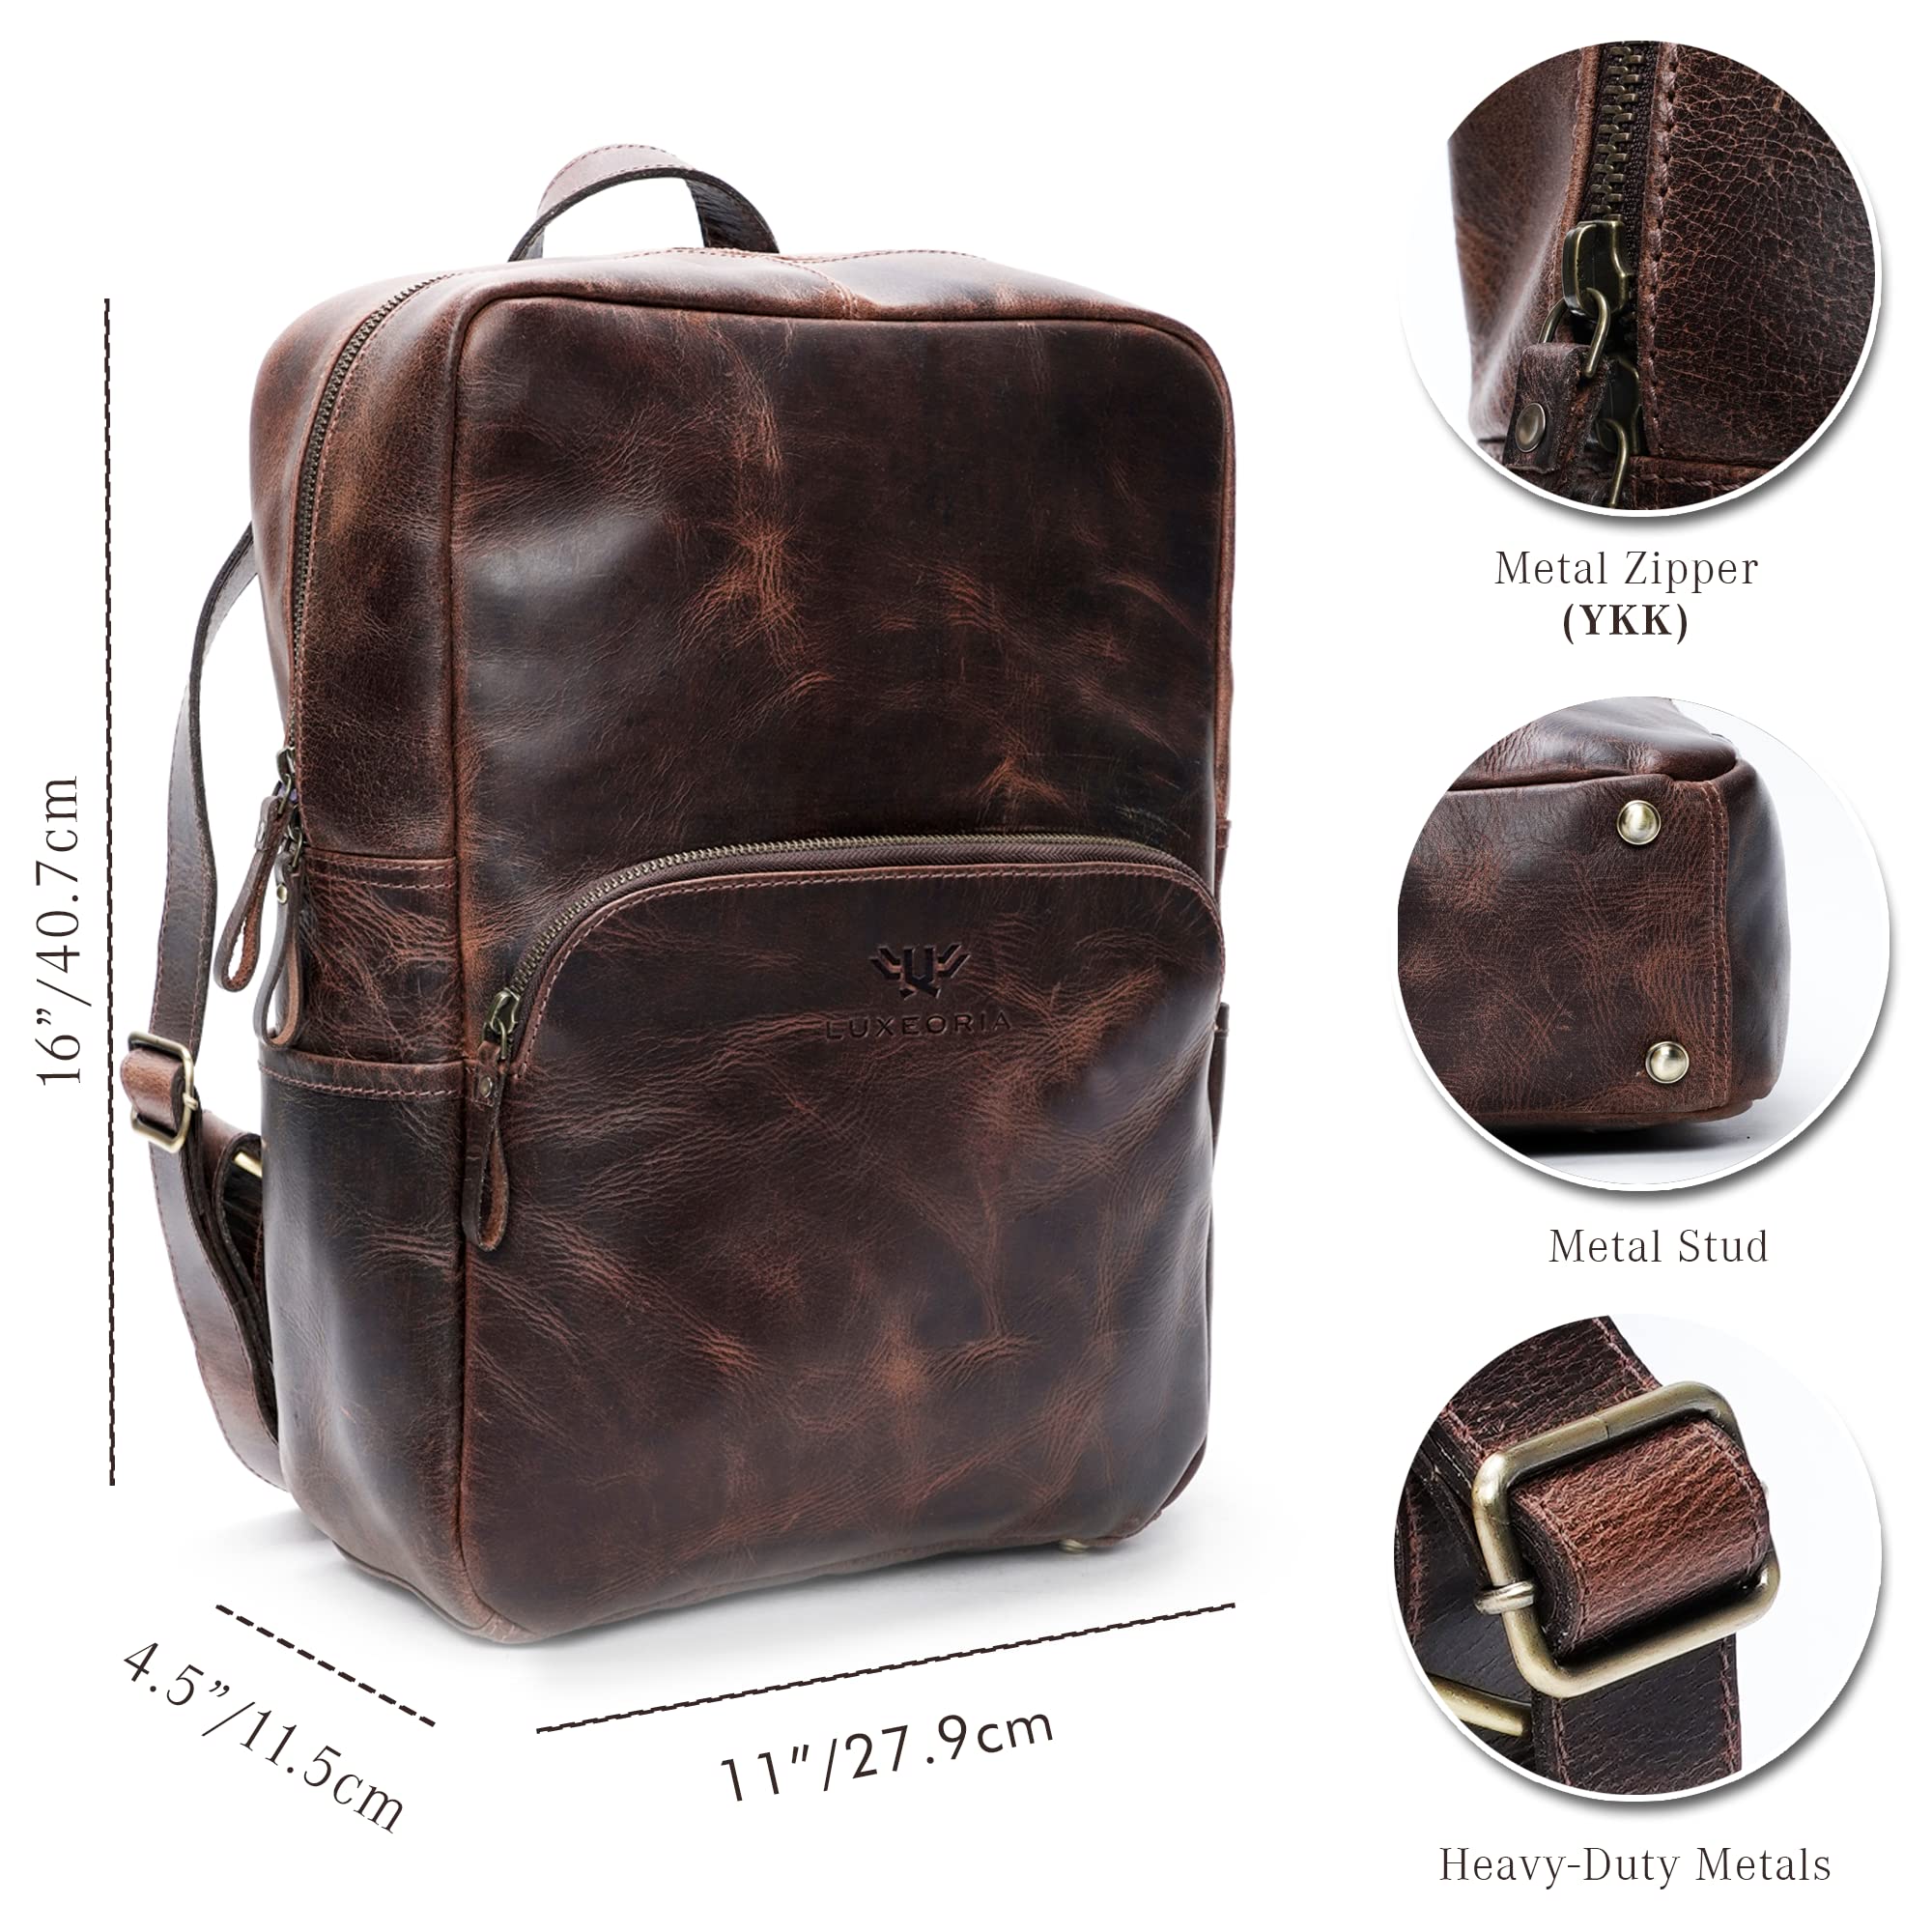 LUXEORIA Handmade Genuine Leather Backpack for Men and Women, Travel Luggage Laptop Bag -15.6 Inch, Retro Style Mens & Womens Casual Daypack For Colleges & Office - Vintage Brown